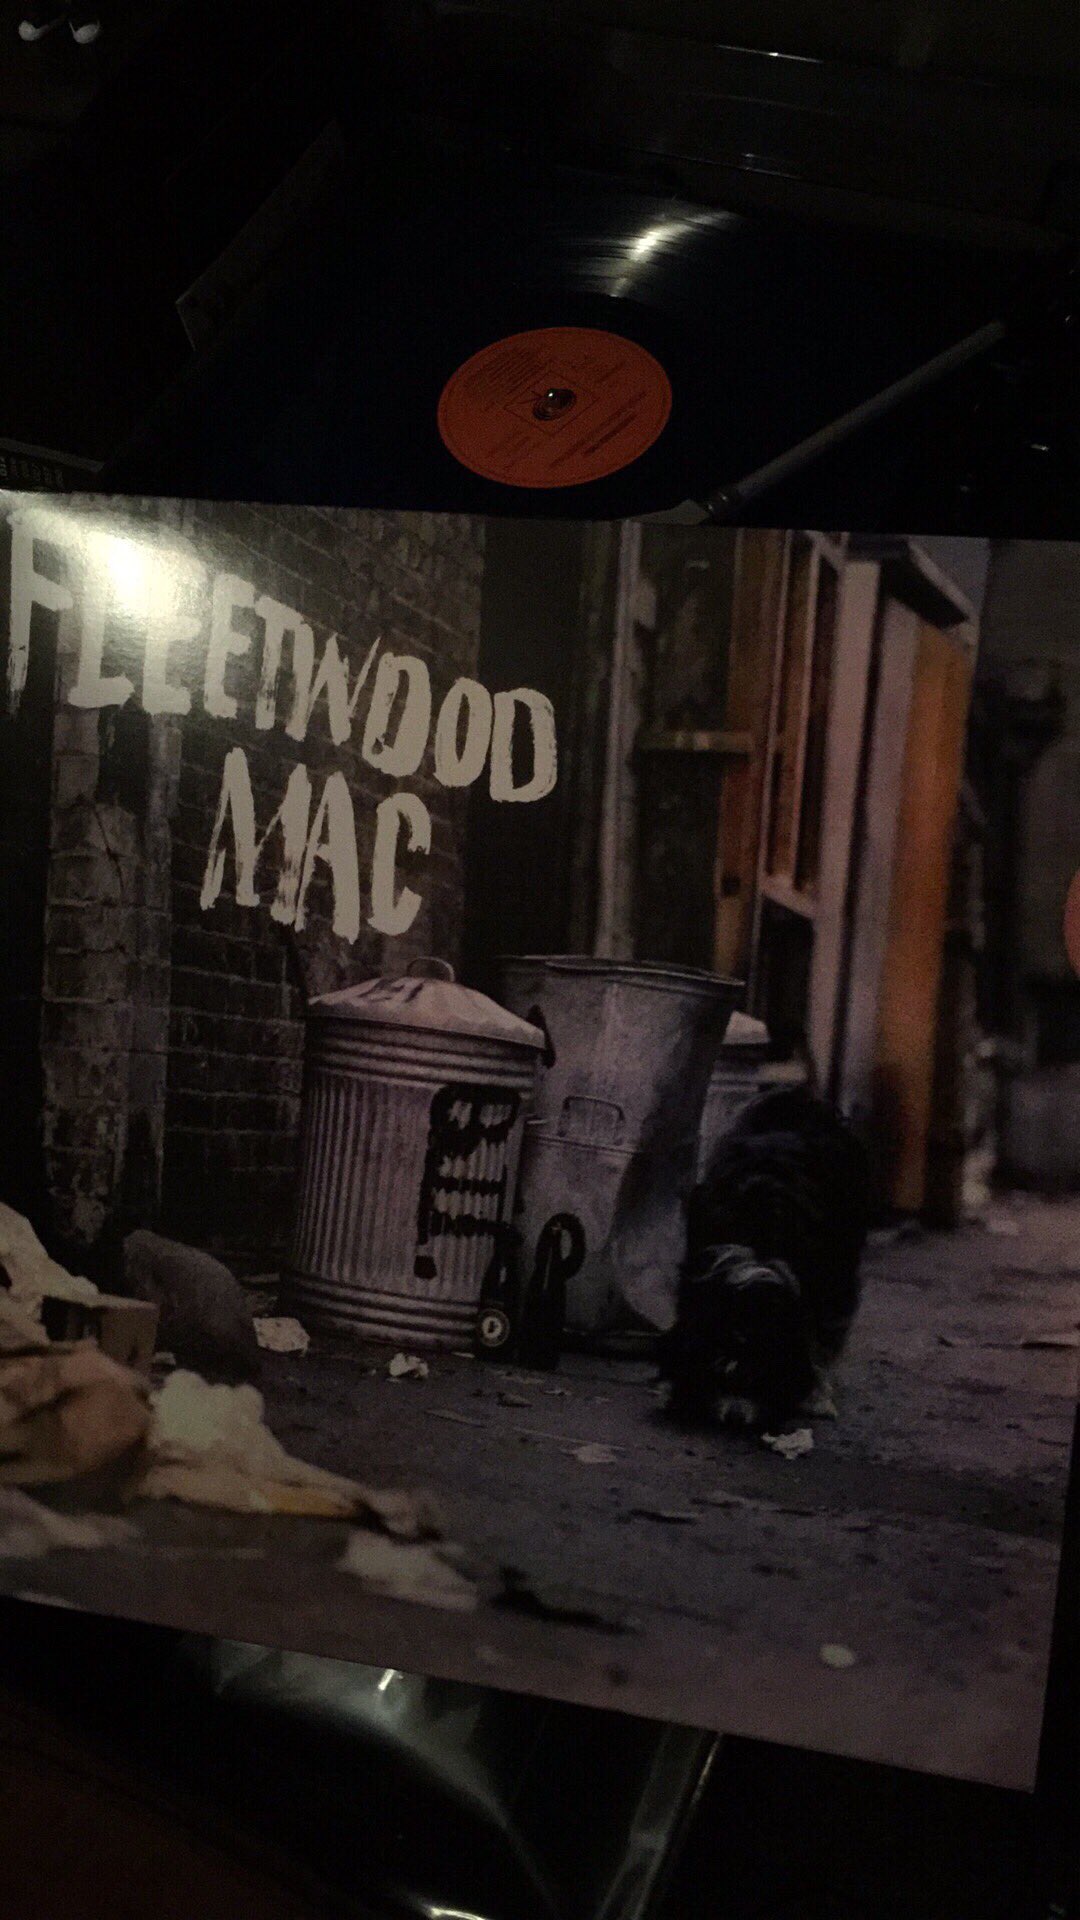 Tonights listening, a great blues album by Peter Green s Fleetwood Mac. Happy birthday to you Mr Peter Green! 